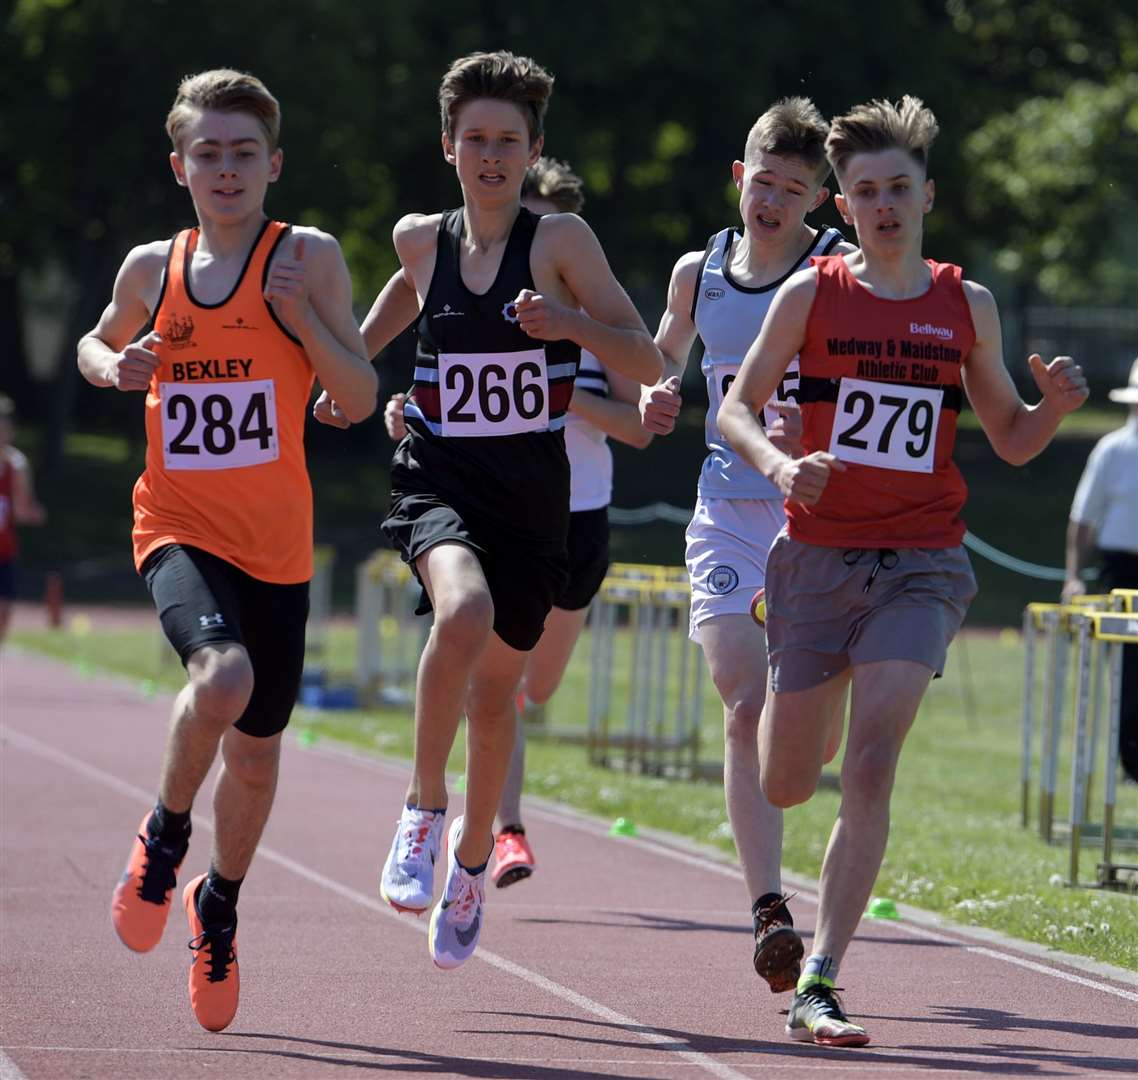 M&M's under-15 boys' 1,500m winner Theo Ronchetti (No.279) leads Dylan Walsham (Bexley, No.284) and Lucas Elmqvist (Blackheath & Bromley Harriers, No.266). Picture: Barry Goodwin (56694652)